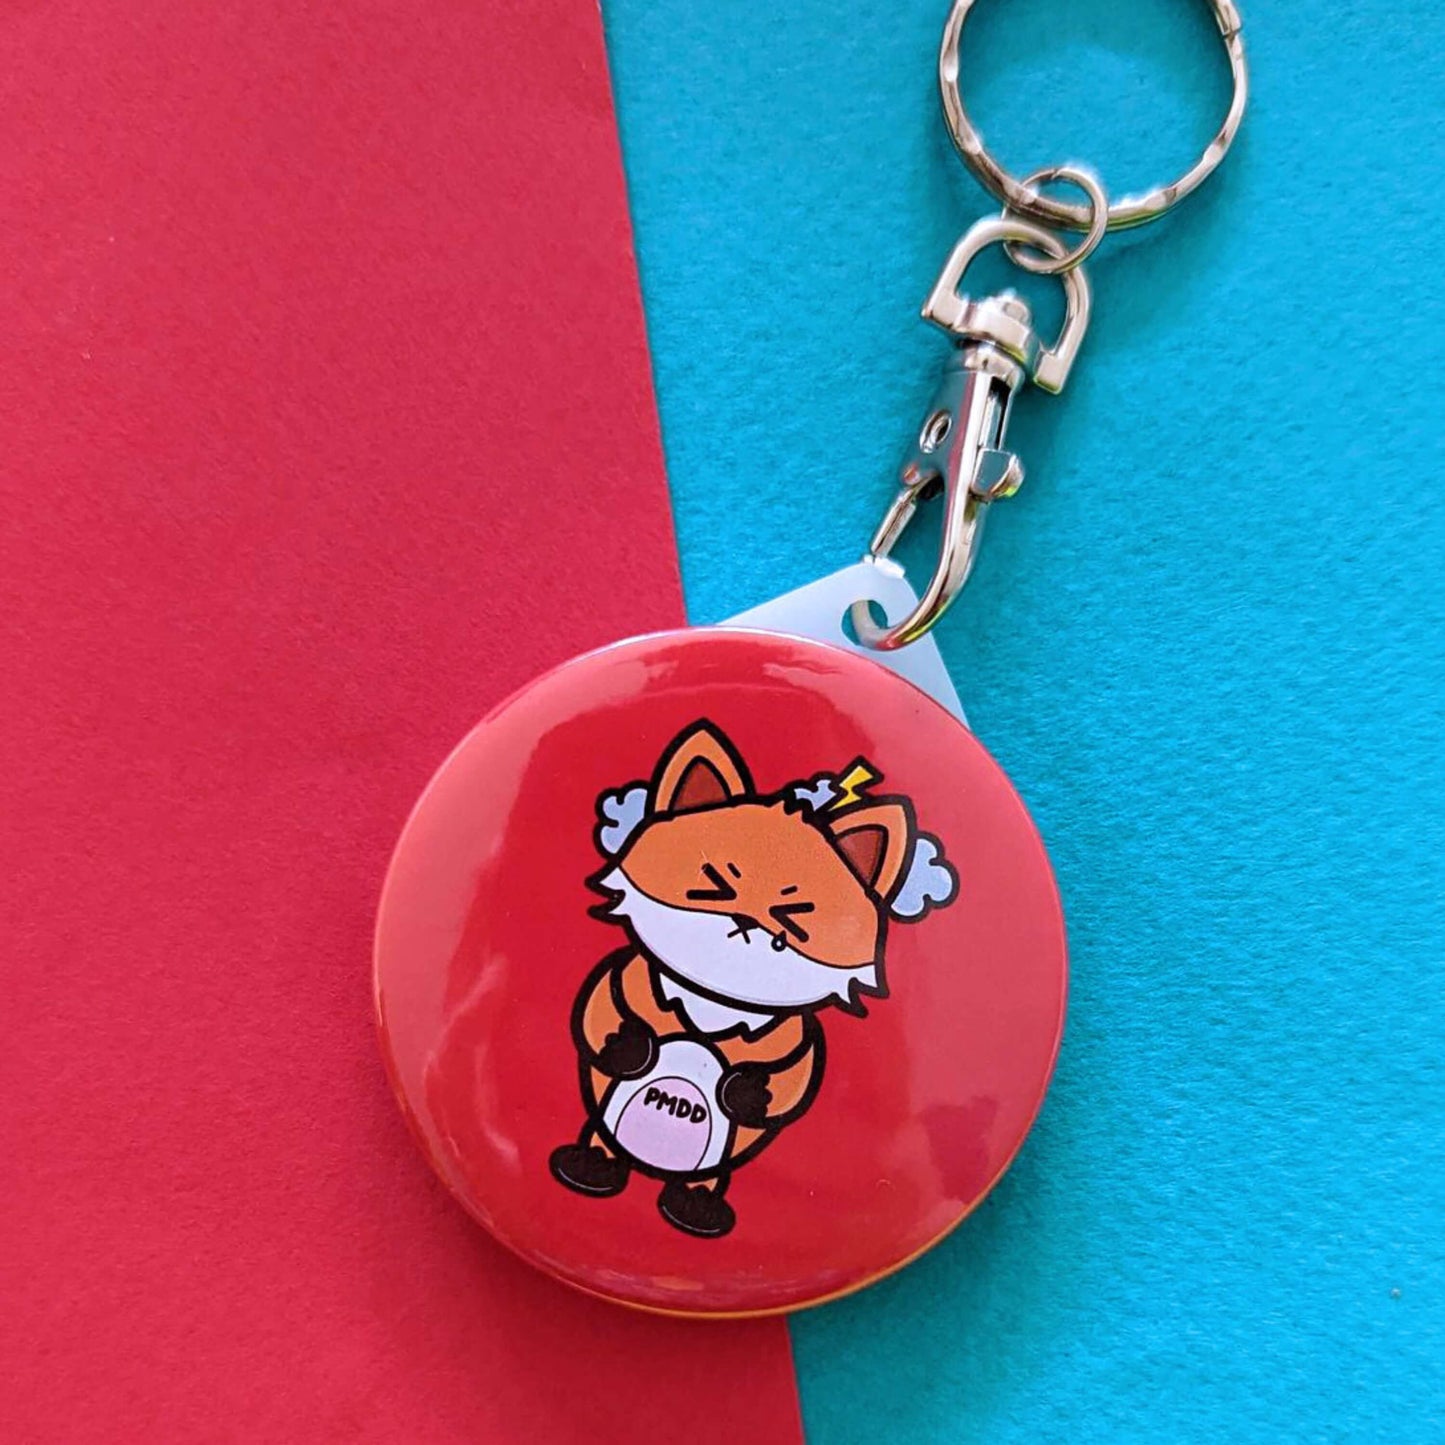 The PMDD Fox Keyring - Premenstrual Dysphoric Disorder PMDD on a red and blue background. The silver lobster clip red plastic circular keyring features a stressed fox with scrunched closed eyes and grey storm clouds above its head, across its pink belly is black text reading 'PMDD'. The hand made design is raising awareness for Premenstrual Dysphoric Disorder PMDD.